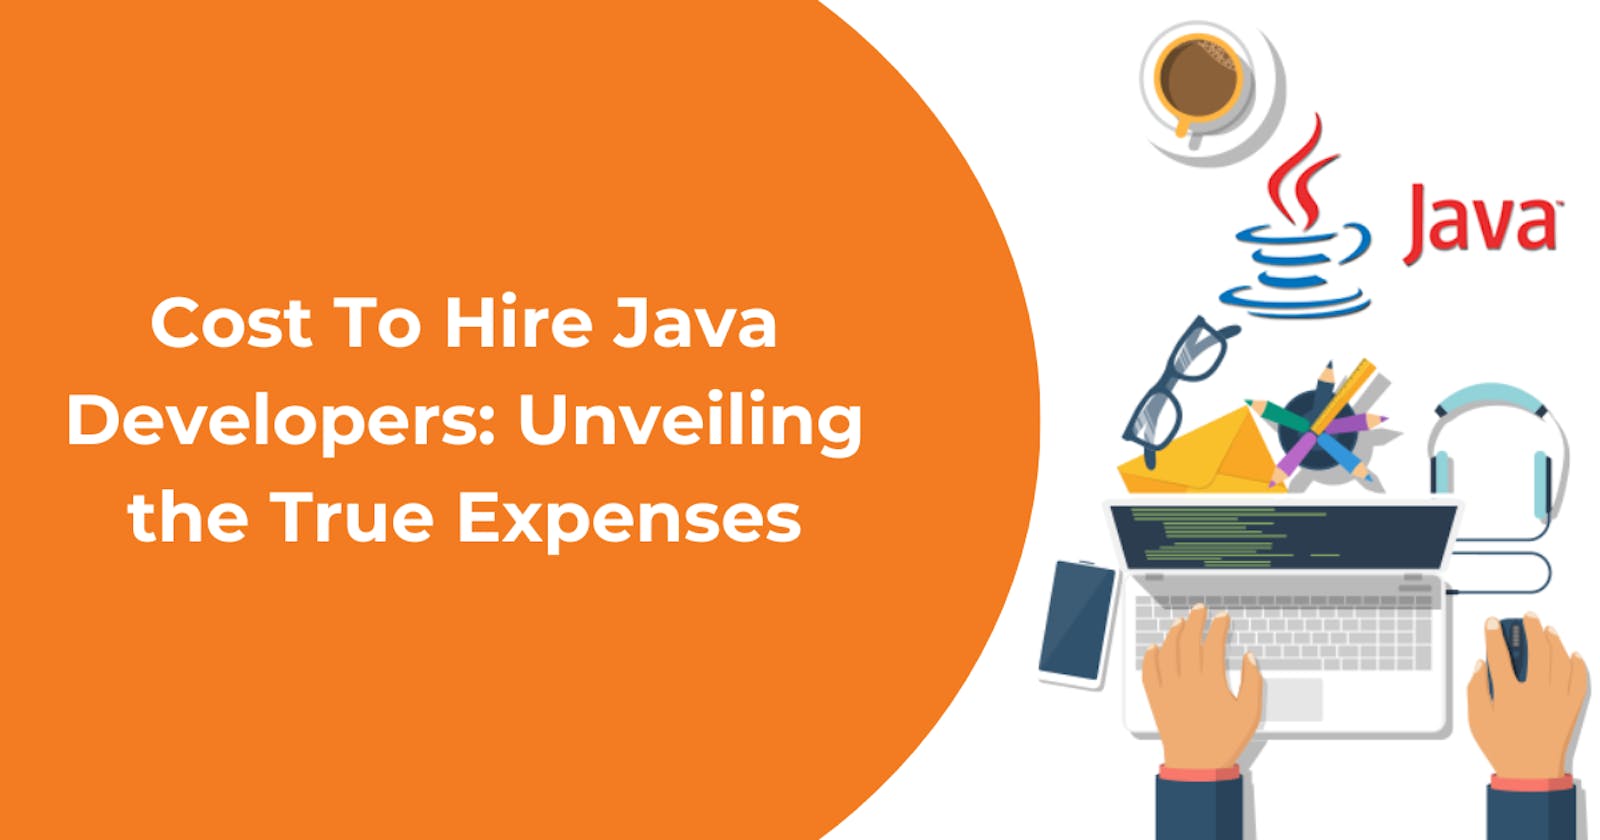 Cost To Hire Java Developers: Unveiling the True Expenses